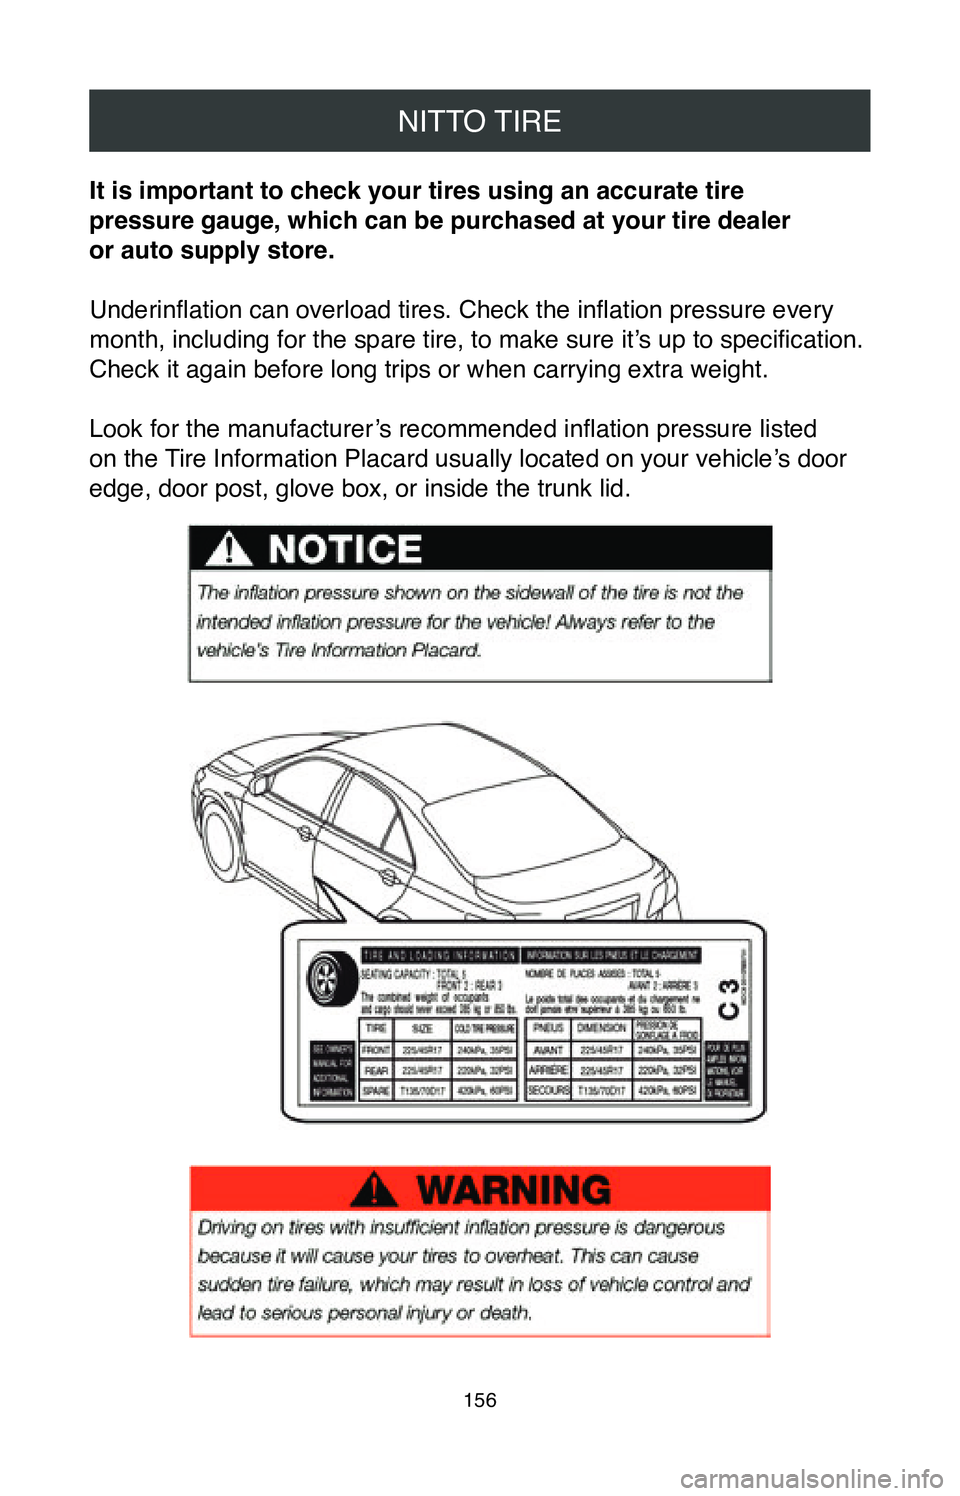 TOYOTA COROLLA HATCHBACK 2020  Warranties & Maintenance Guides (in English) NITTO TIRE
156
It is important to check your tires using an accurate tire  
pressure gauge, which can be purchased at your tire dealer  
or auto supply store.
Underinflation can overload tires. Check 